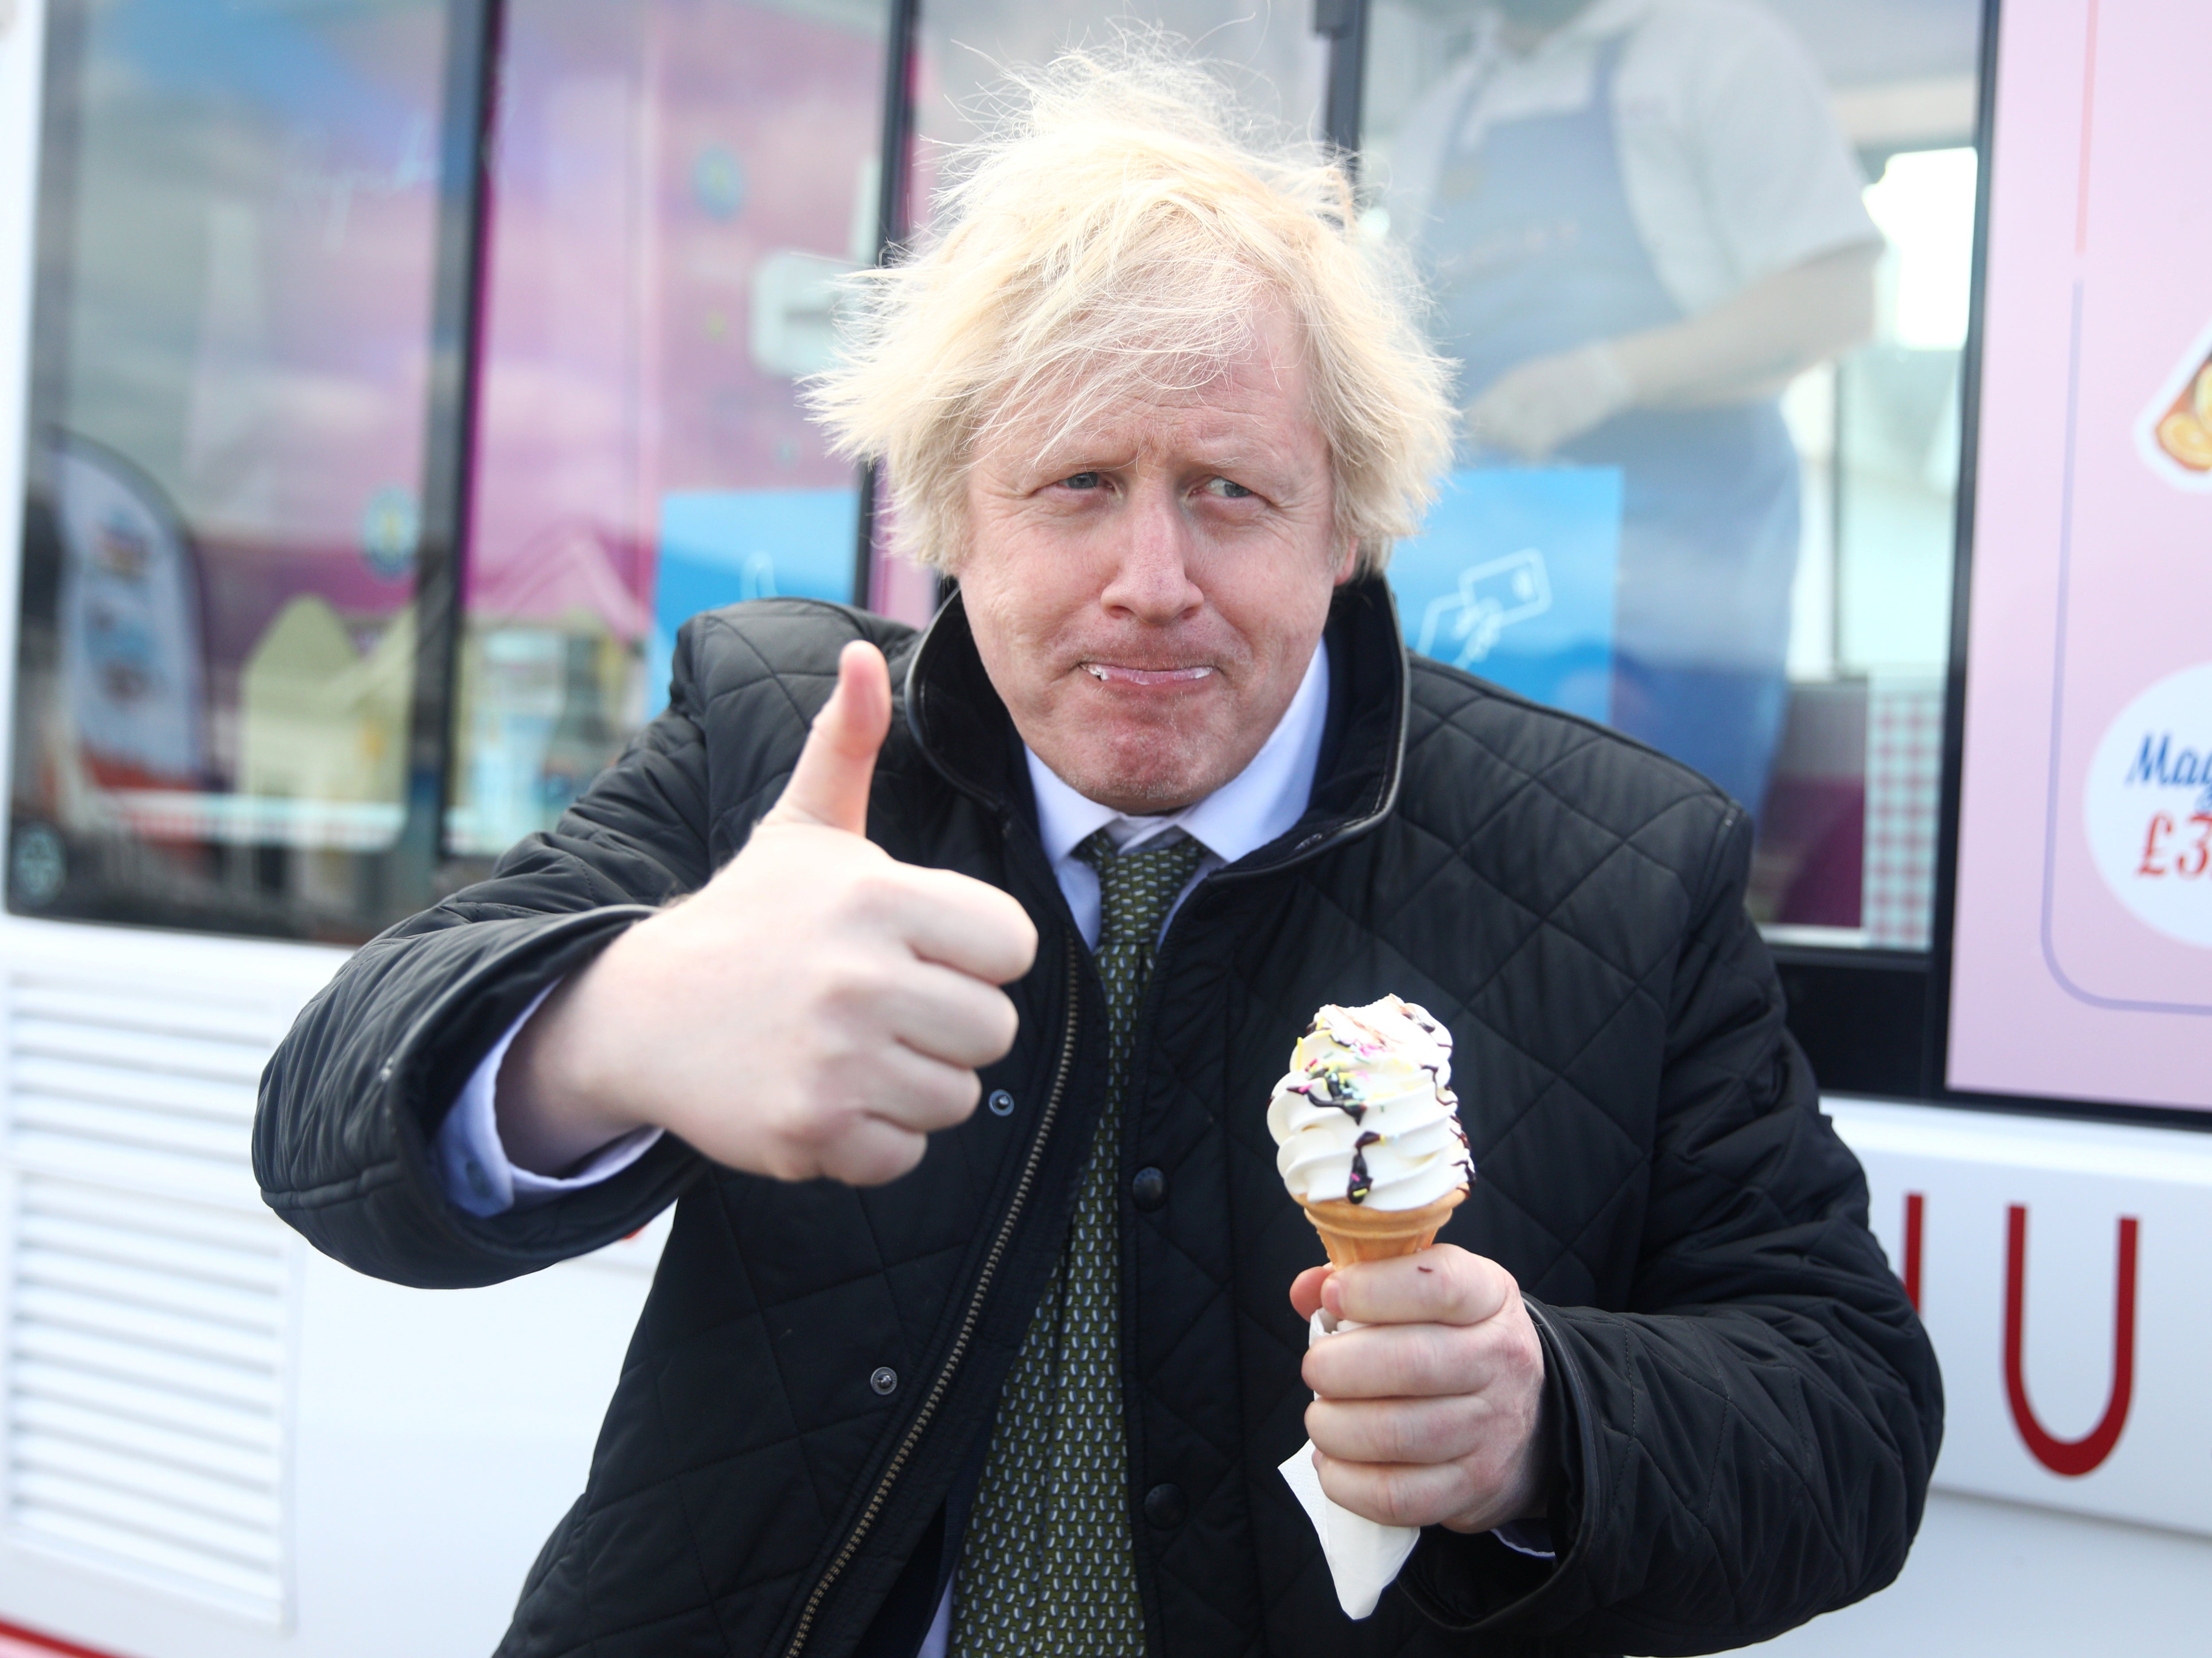 One flake short of a 99: don’t ask me, says Boris Johnson. You’re all on your own